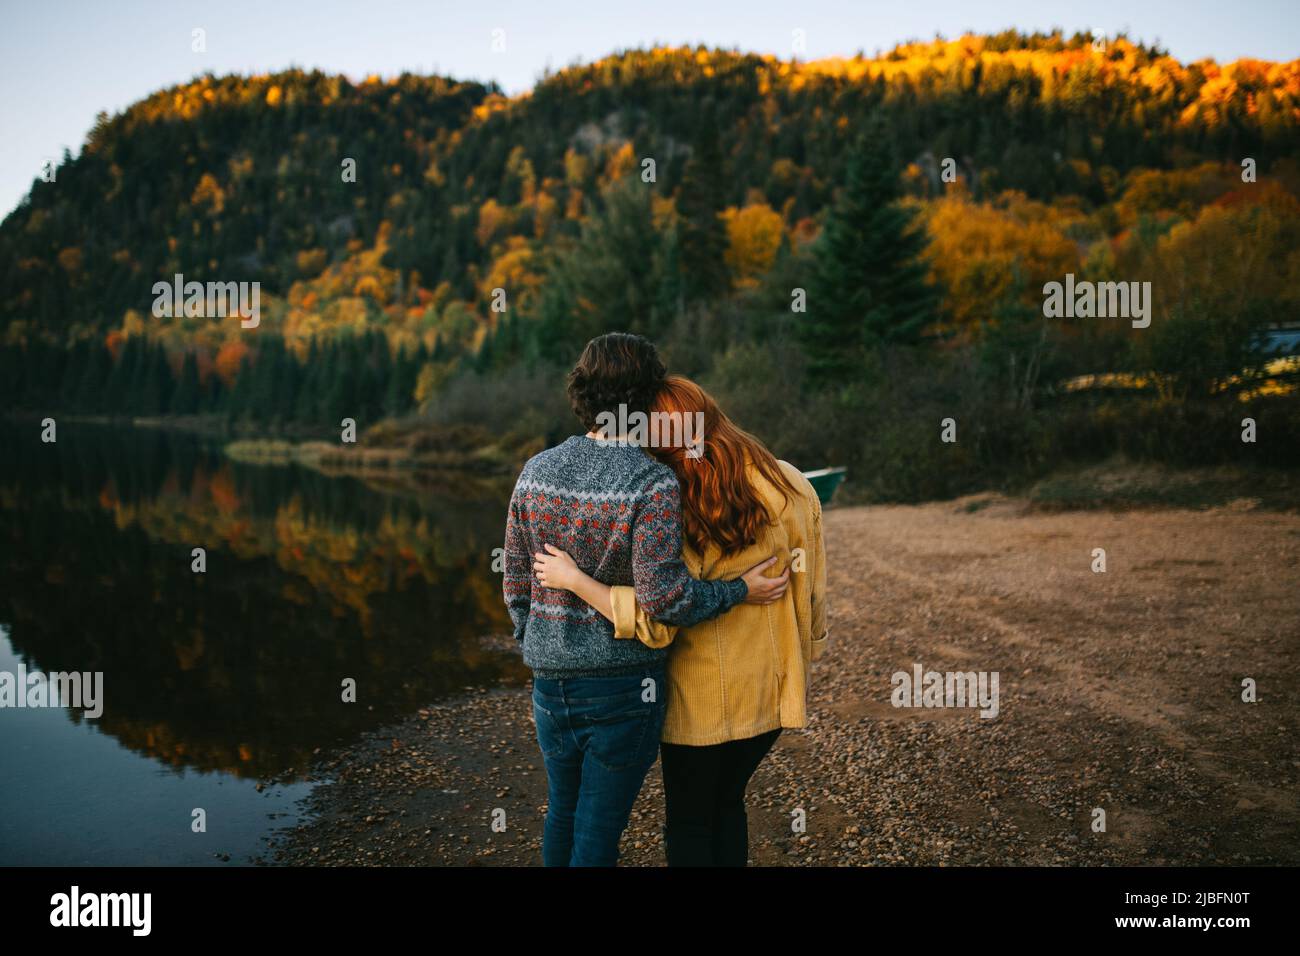 Back view of romantic unrecognizable traveling couple in stylish clothes embracing and admiring scenic autumn landscape of calm lake surrounded by lus Stock Photo